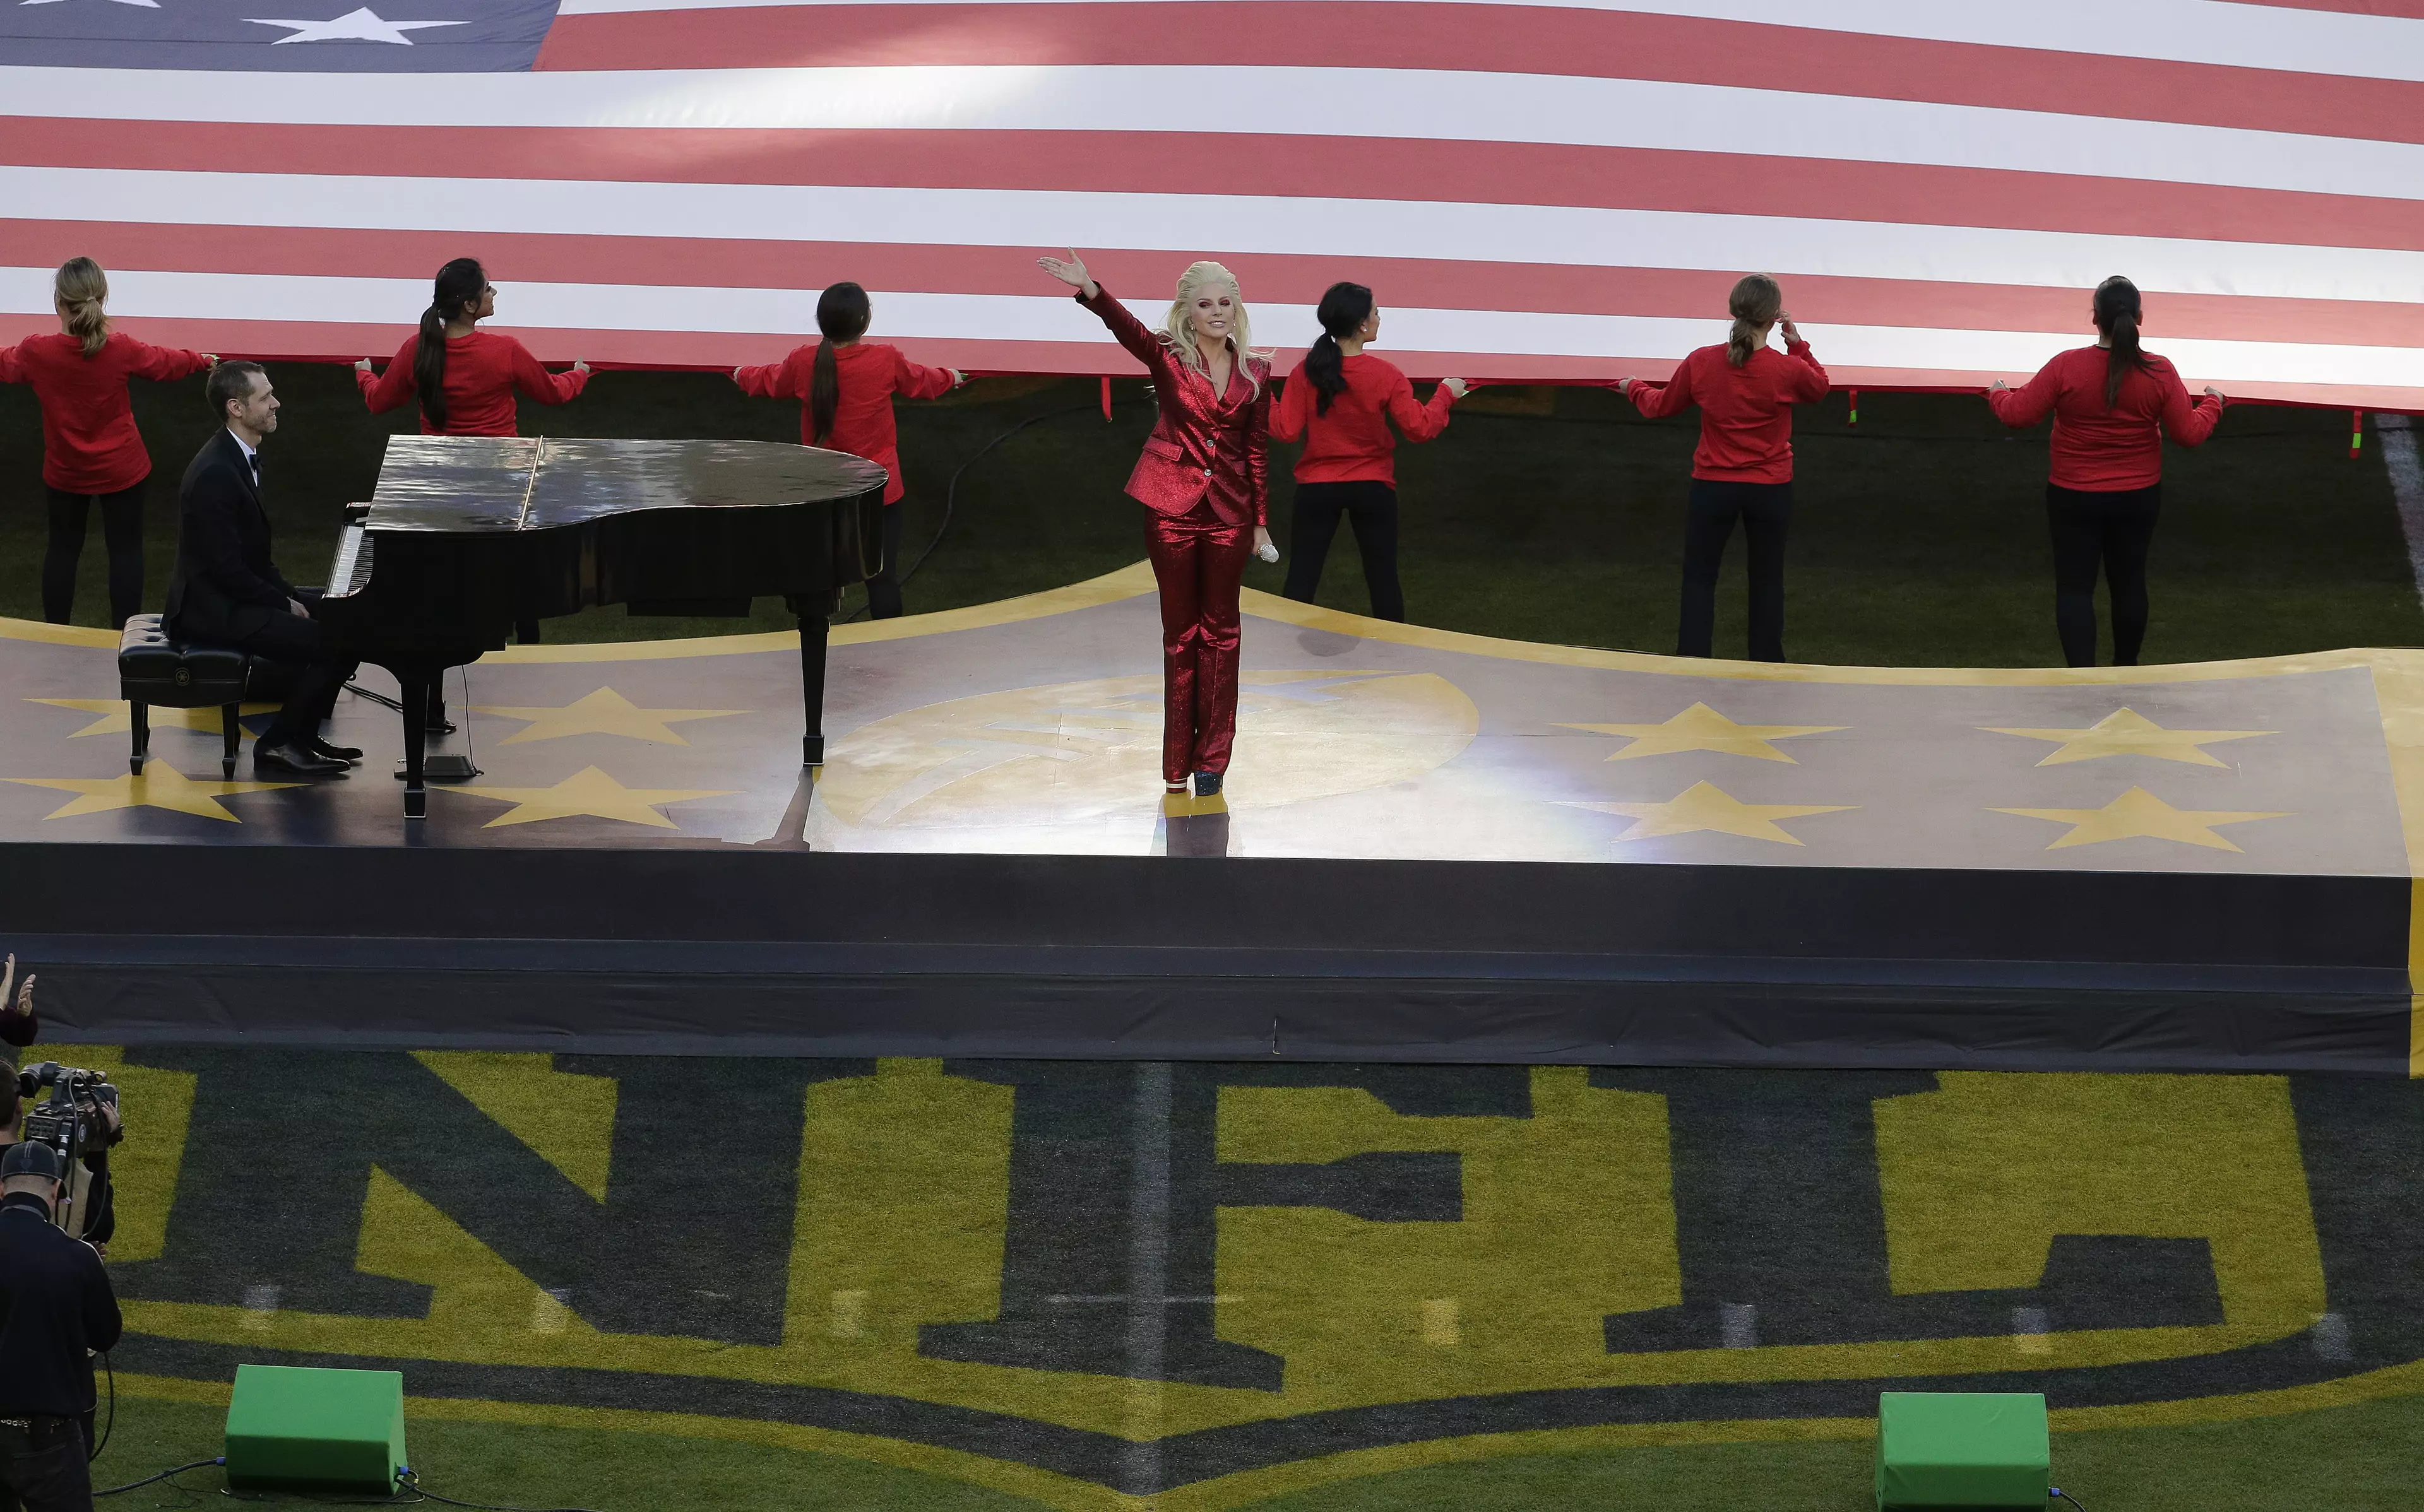 Lady Gaga Confirmed To Play The Half Time Show At Superbowl 51